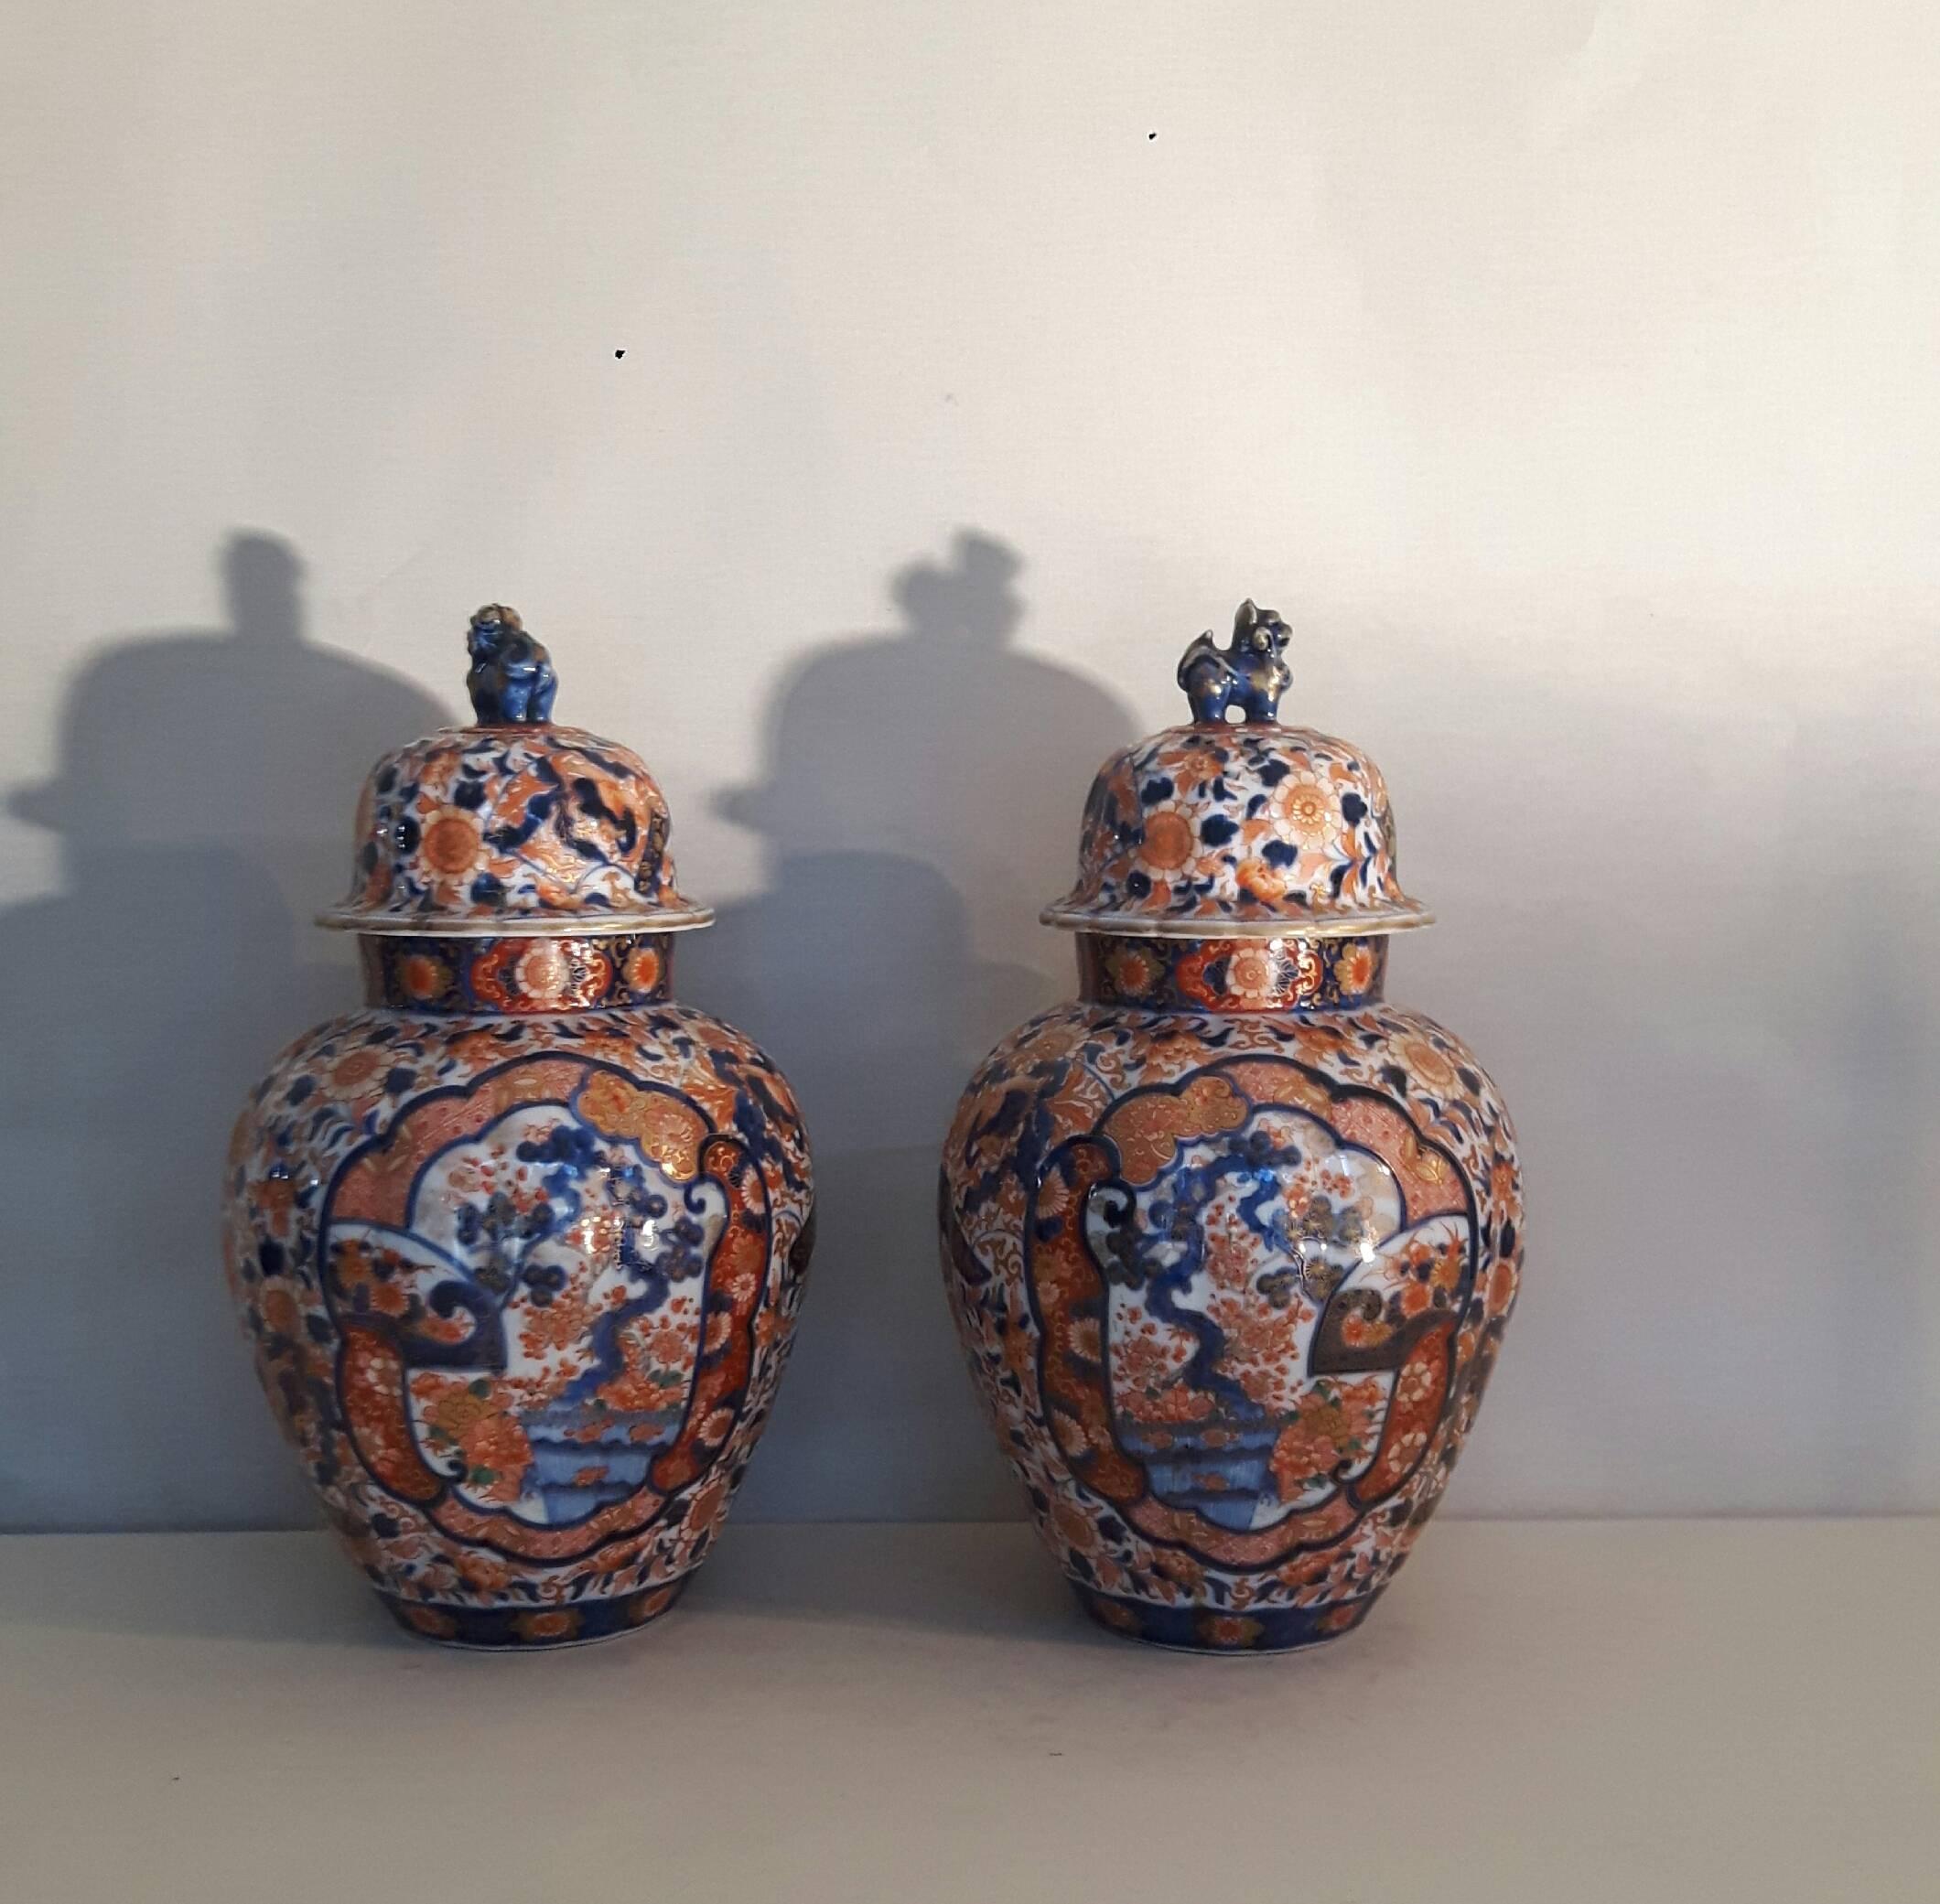 A heavily decorated pair lidded Japanese Imari vases, the design with cartouches of the tree of life and various flora, the lids adorned by a dog of Foe. The vases are signed by Crouncha.